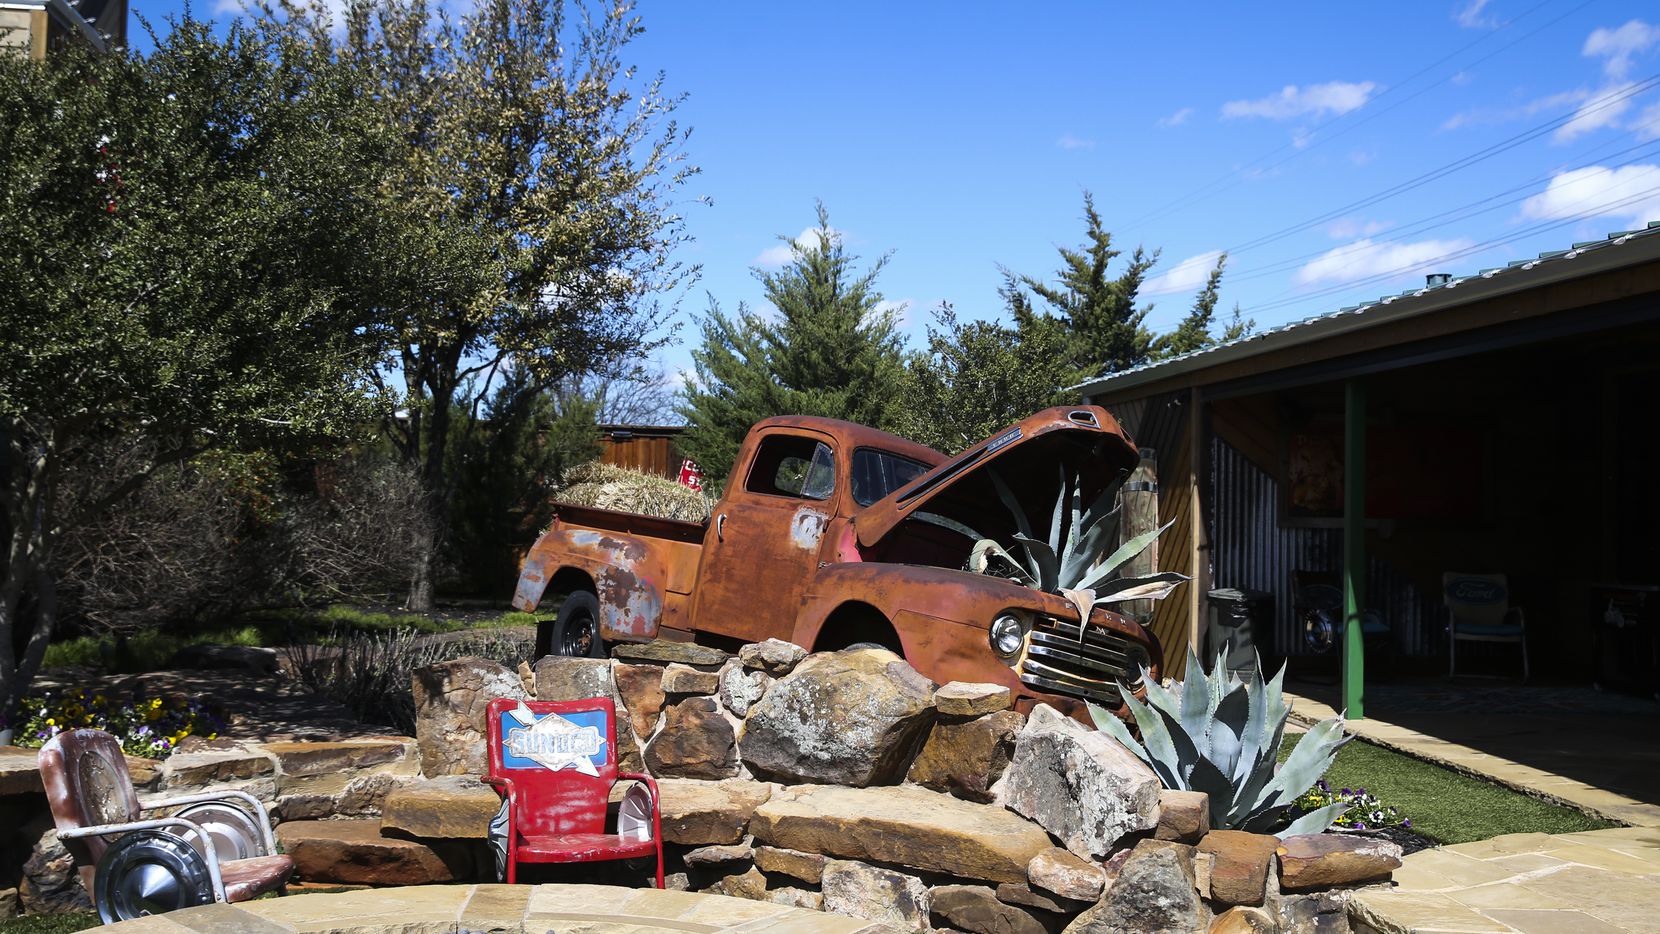 A rusted 1940's truck is seen used as a planter at the Solera TAC 1 innovation property on Wednesday, March 13, 2019. (Ryan Michalesko/The Dallas Morning News)